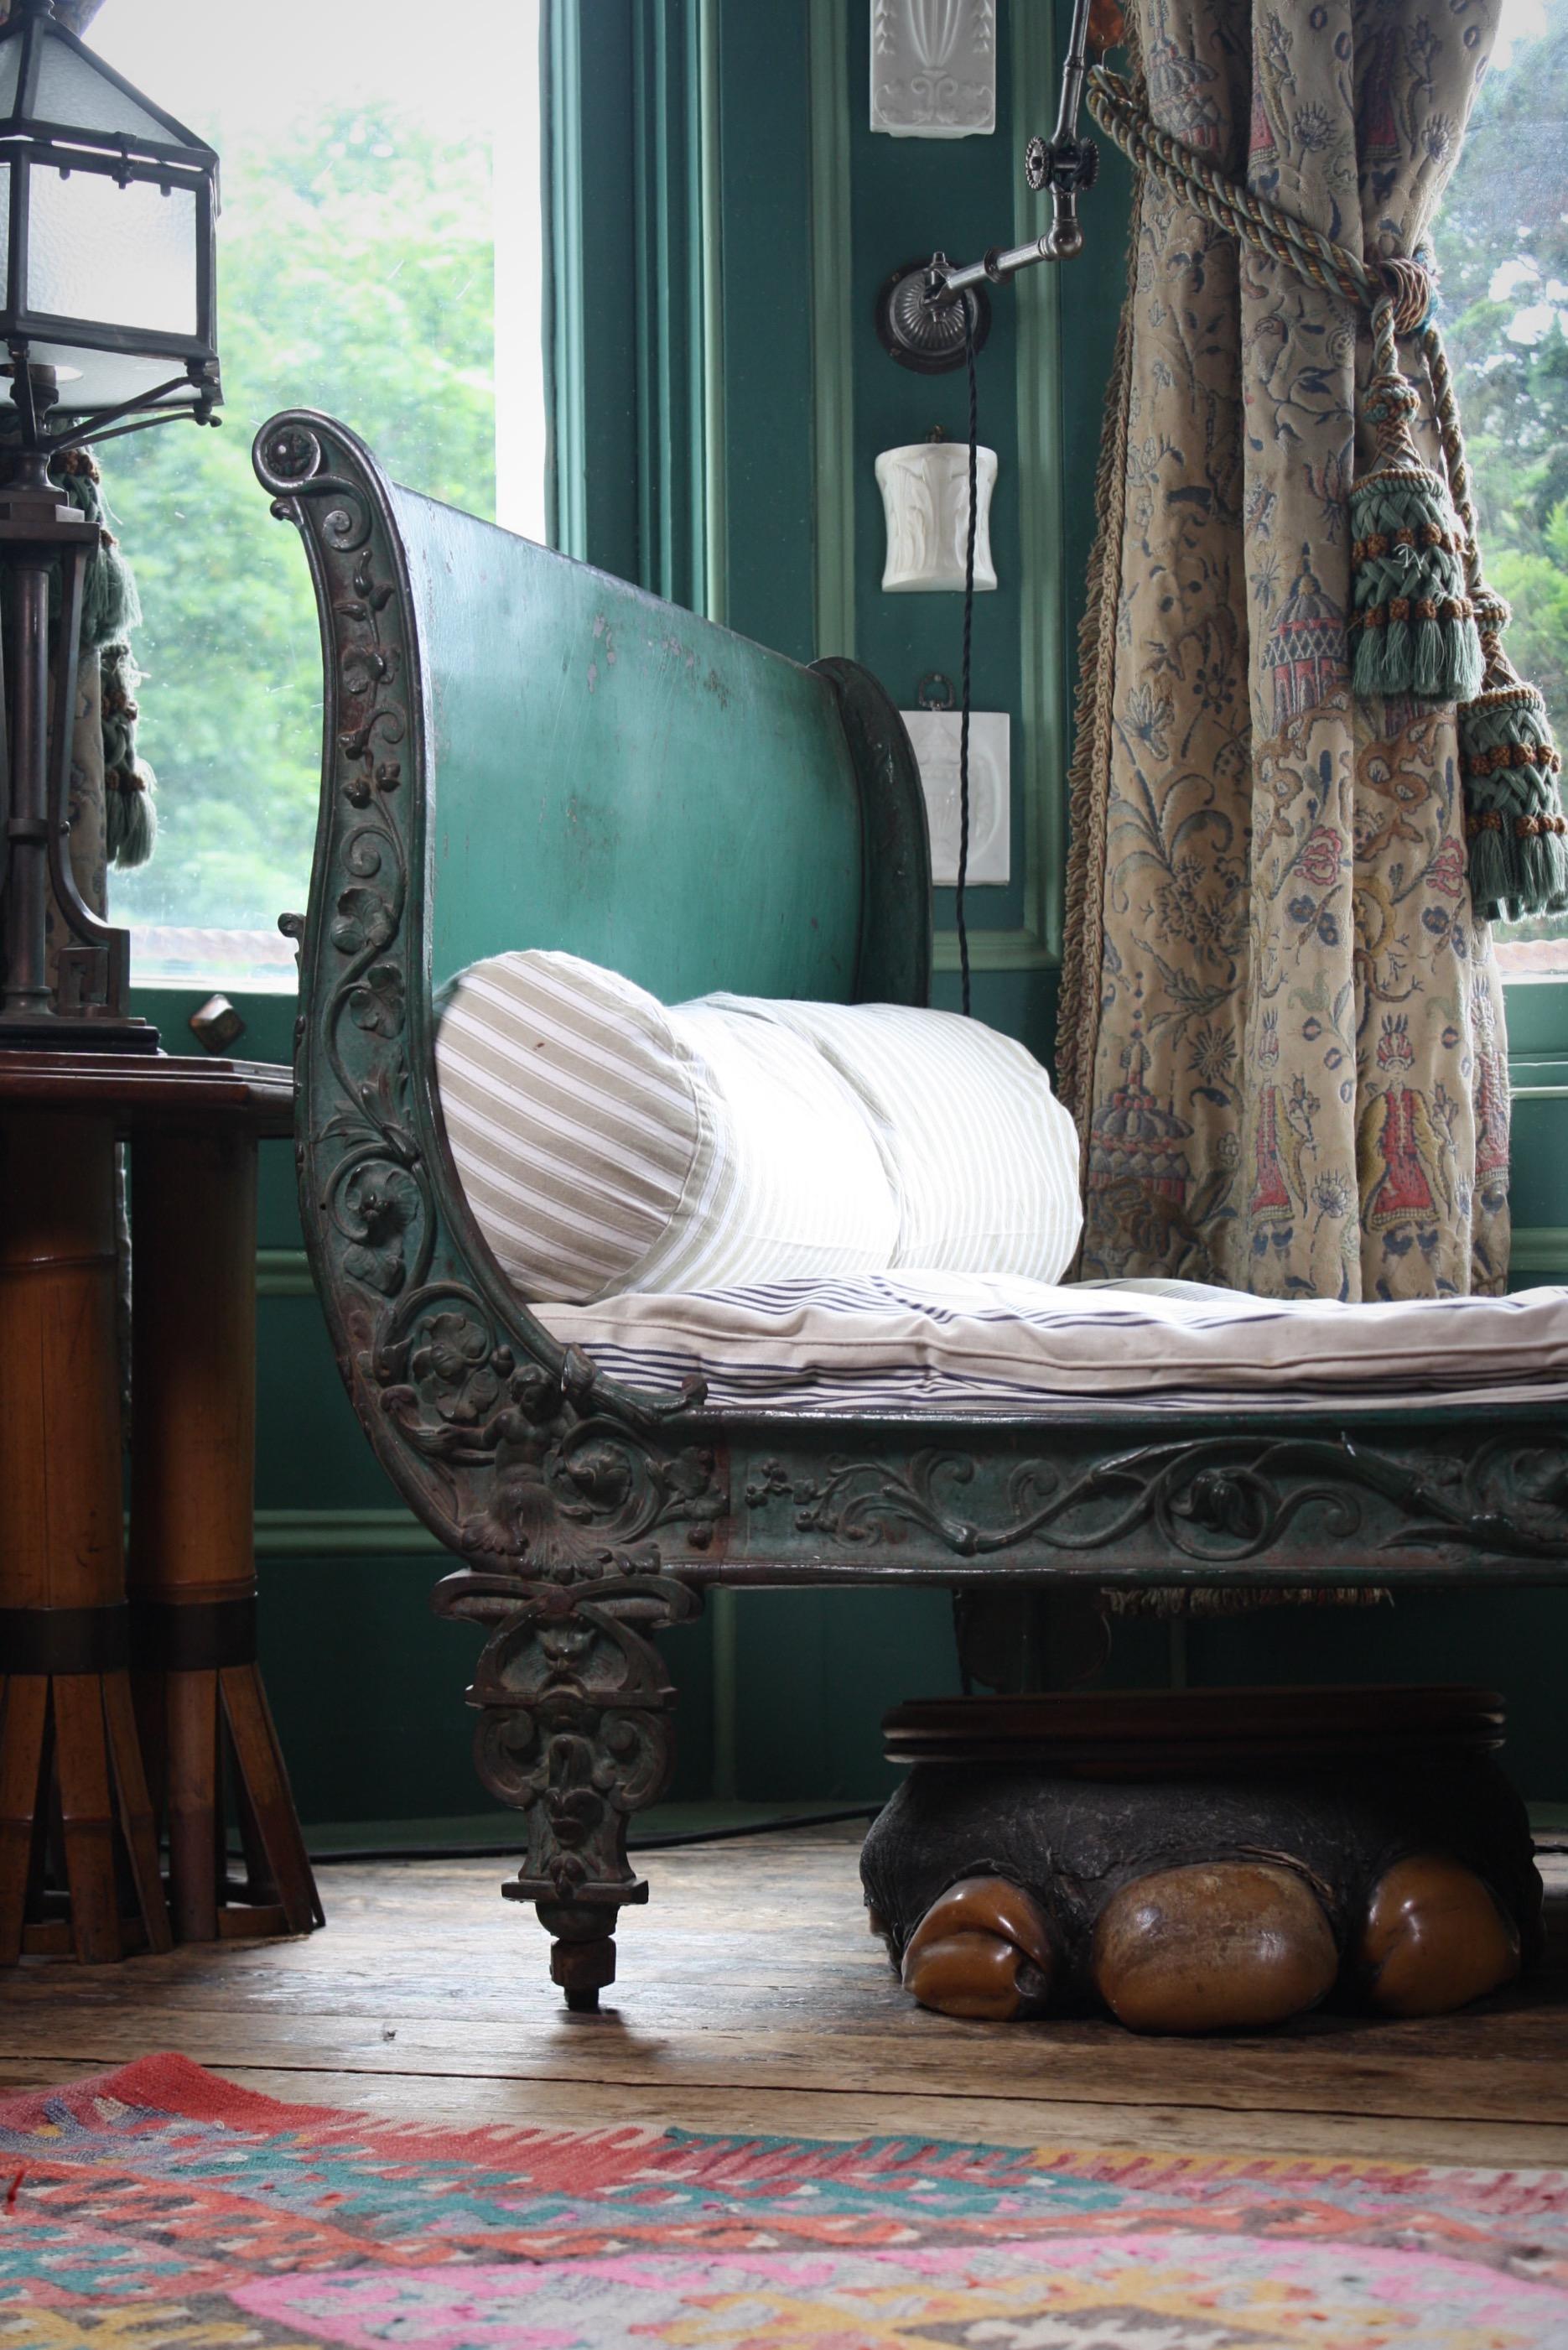 A wonderfully worn circa 1860 Napoleon lll cast iron daybed, features curved sides with intricate floral scroll work figures and faces with a nod to the rococo style 

Original green paint, faded, chipped, scratched consistent with age and truly